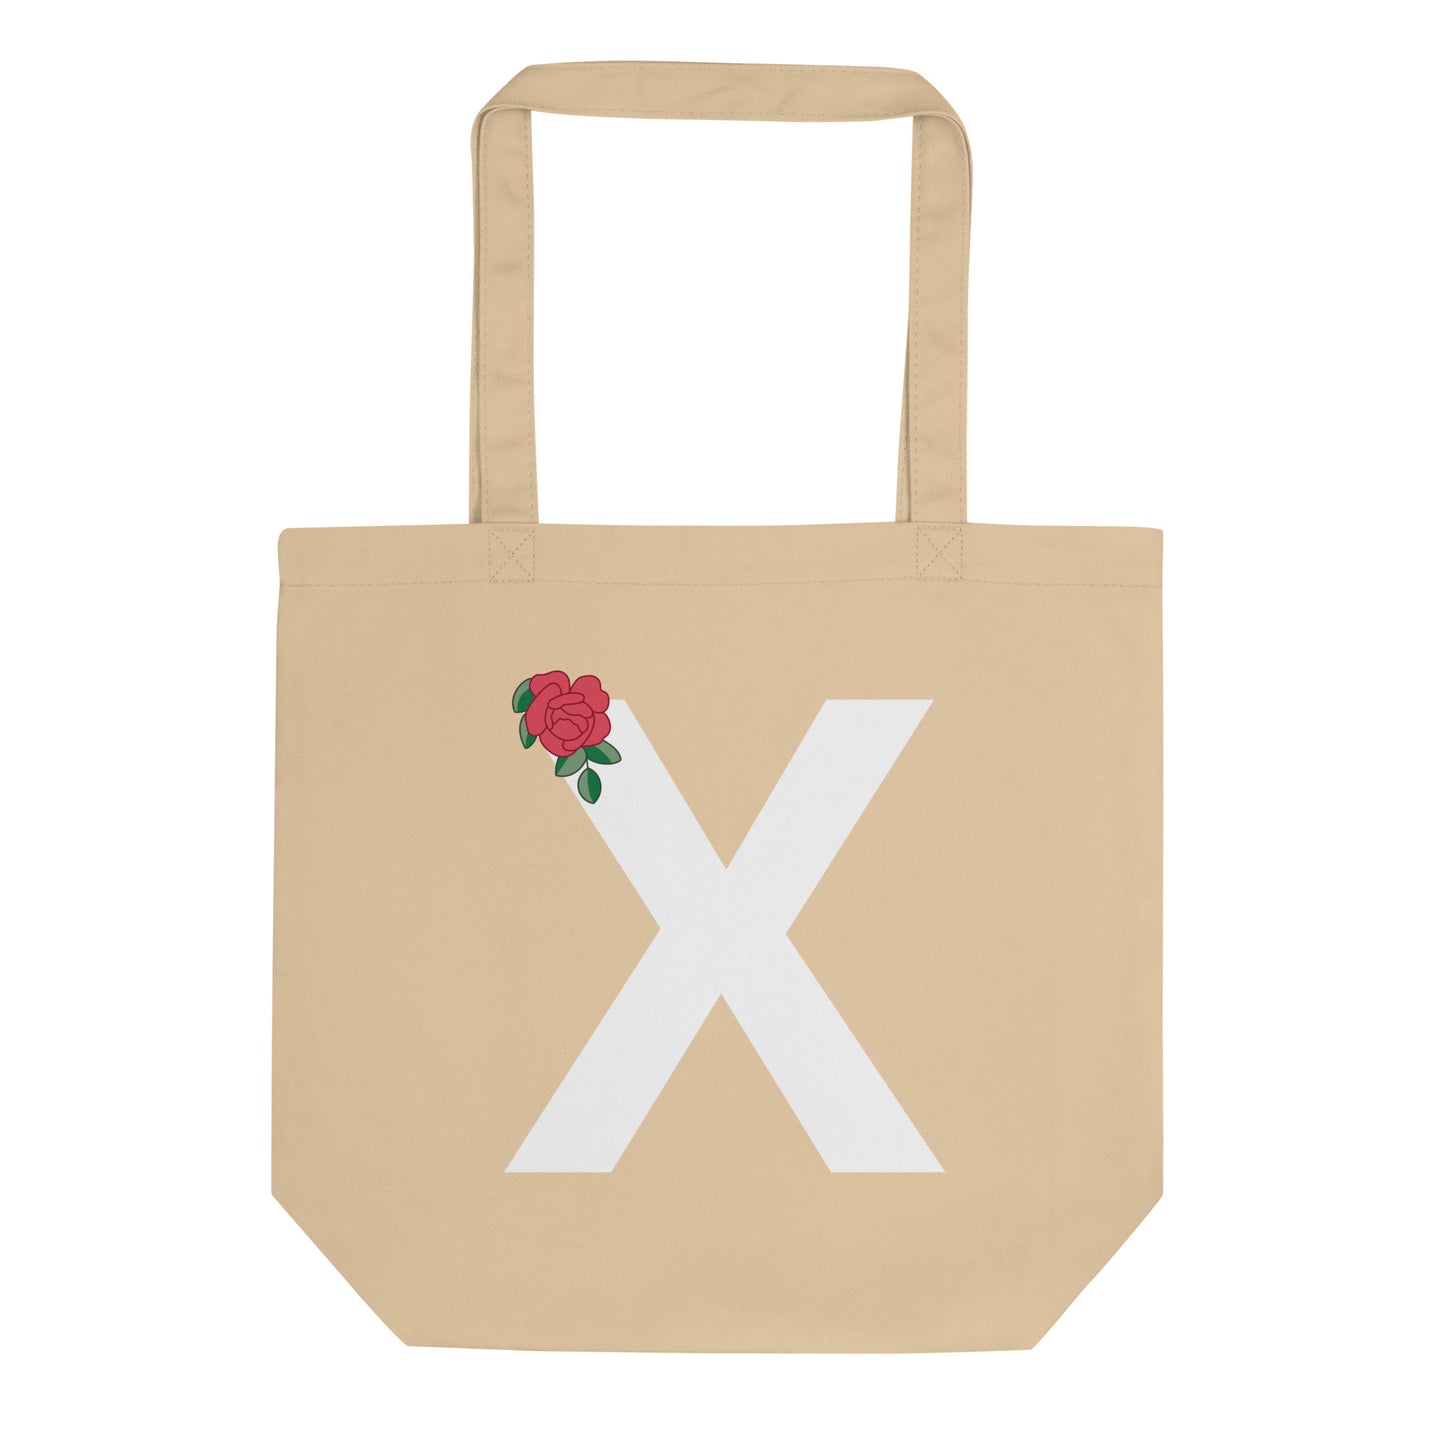 Letter "X" Eco Tote Bag